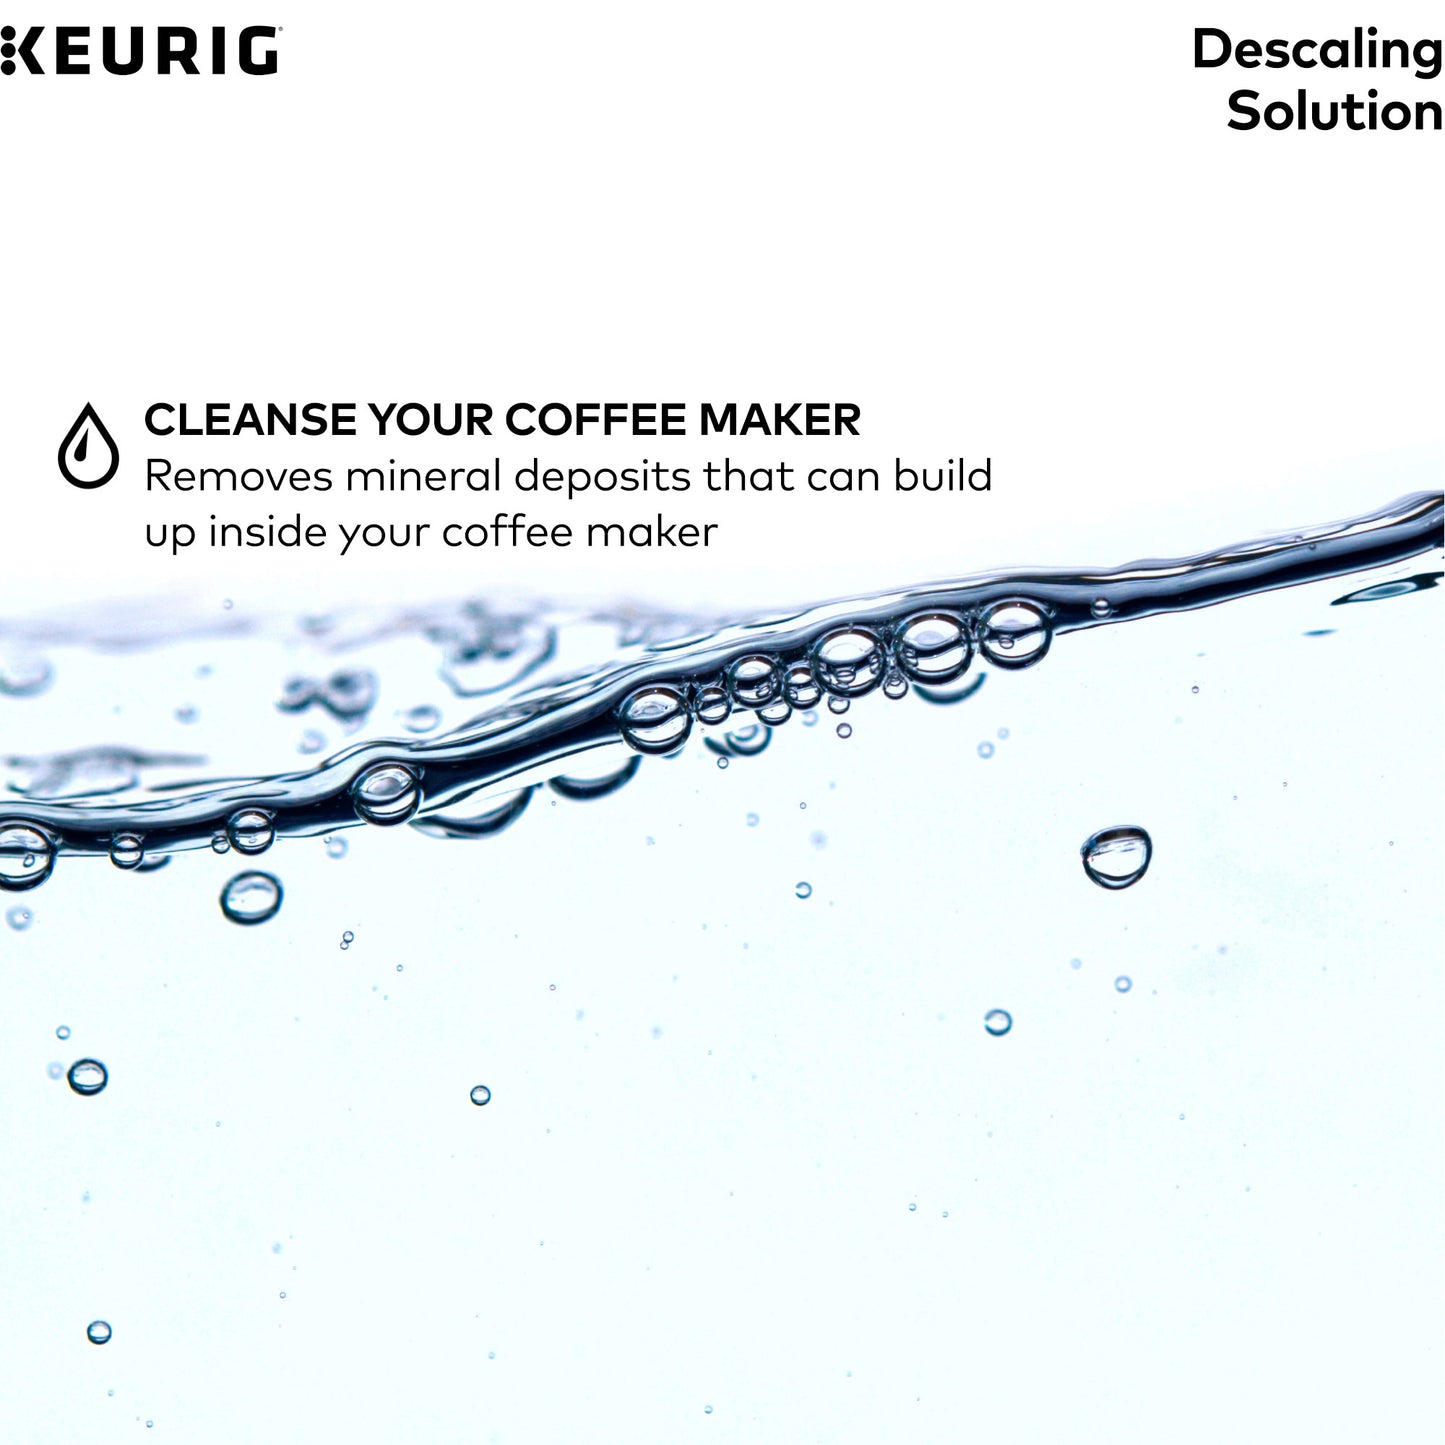 Keurig Descaling Solution For All Keurig 2.0 and 1.0 K-Cup Pod Coffee Makers